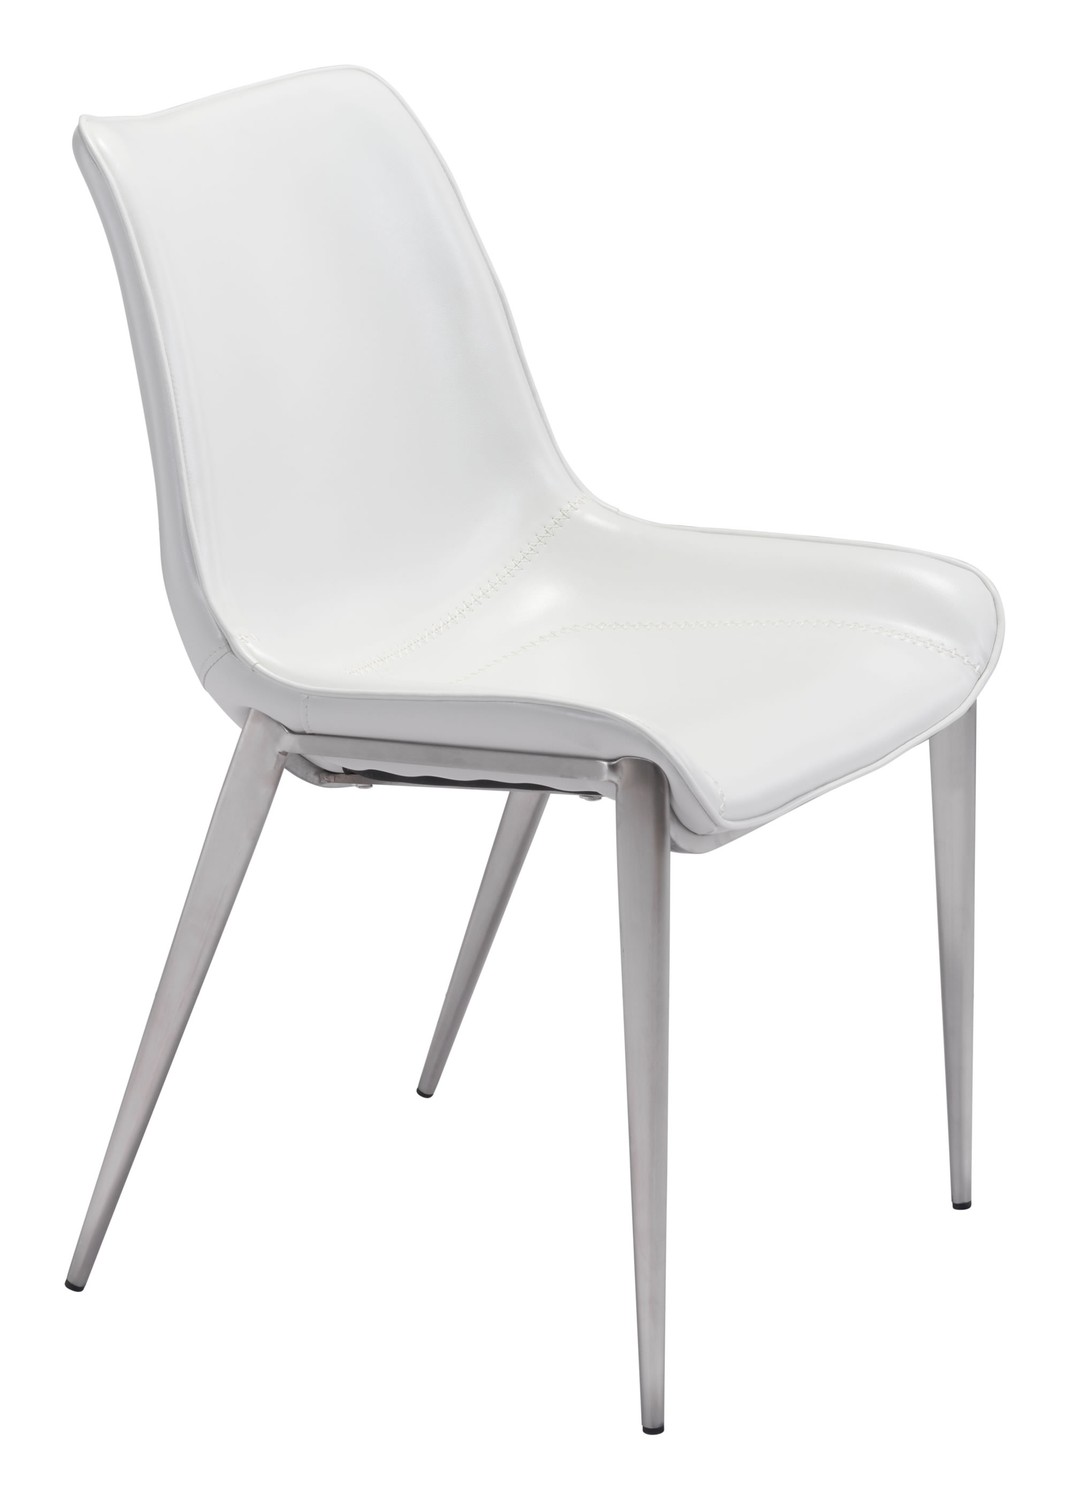 Stich Design White Faux Leather and Stainless Side or Dining Chairs Set of 2